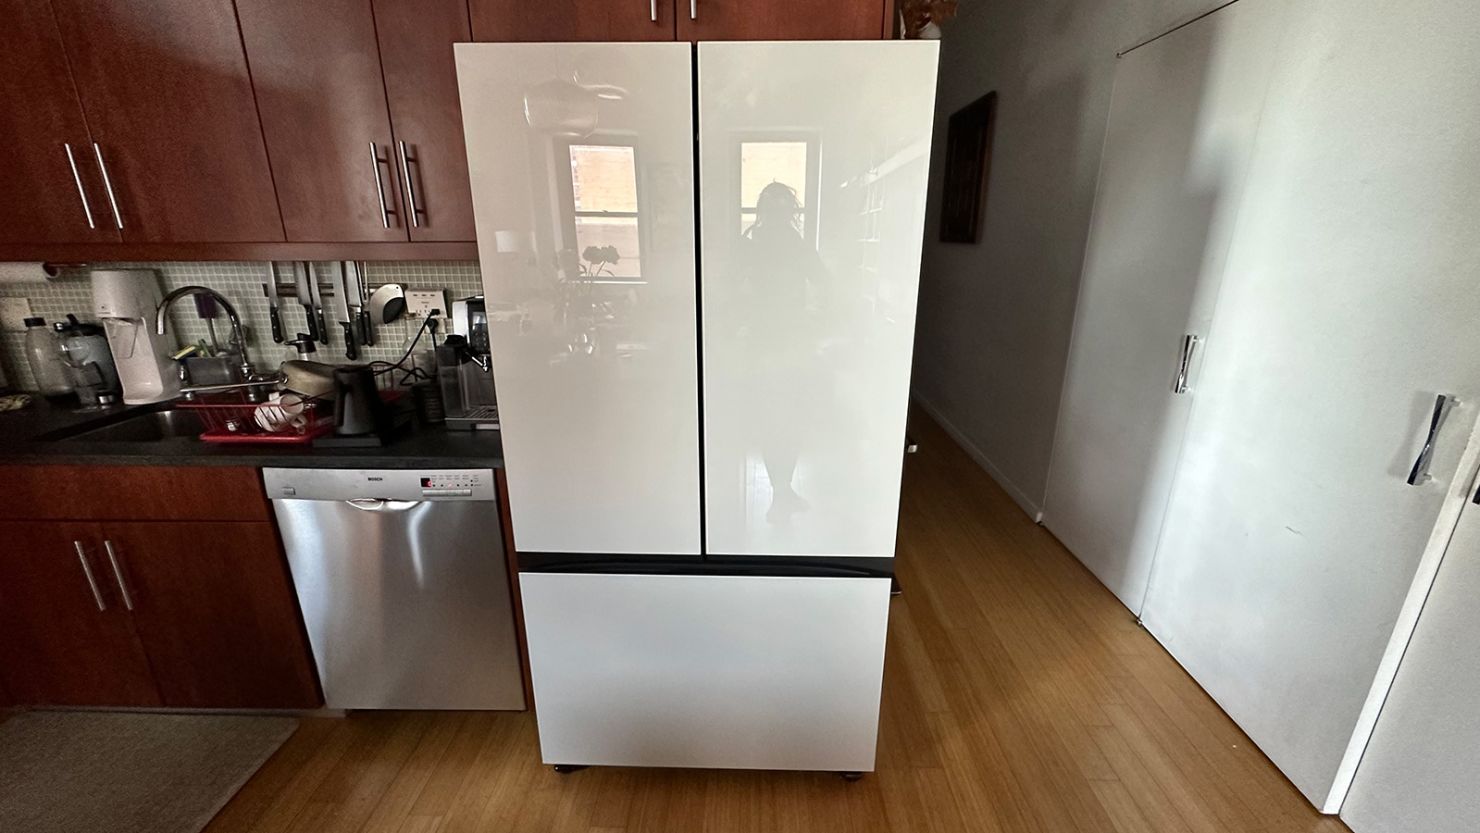 Food for thought: Should you buy a smart refrigerator